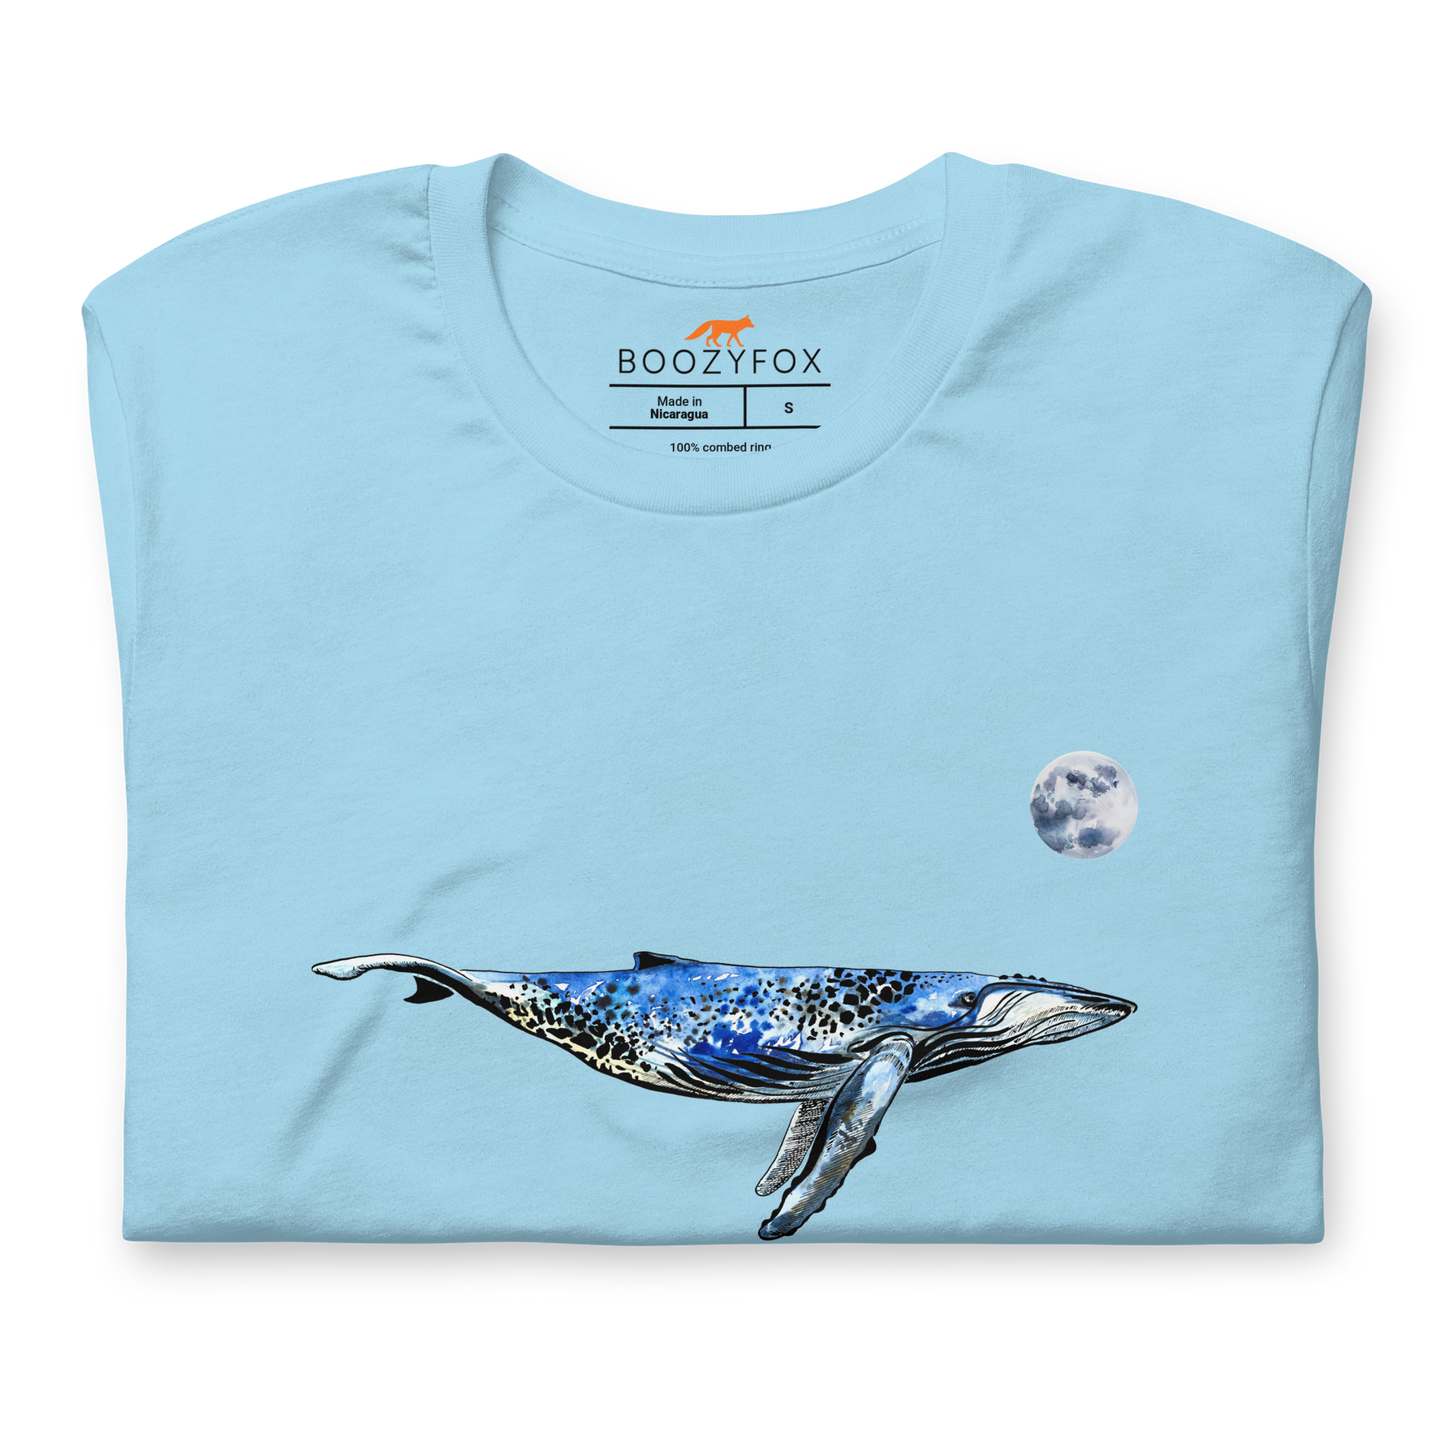 Front Details of a Ocean Blue Premium Whale T-Shirt featuring majestic Whale Under The Moon graphic on the chest - Cool Graphic Whale Tees - Boozy Fox